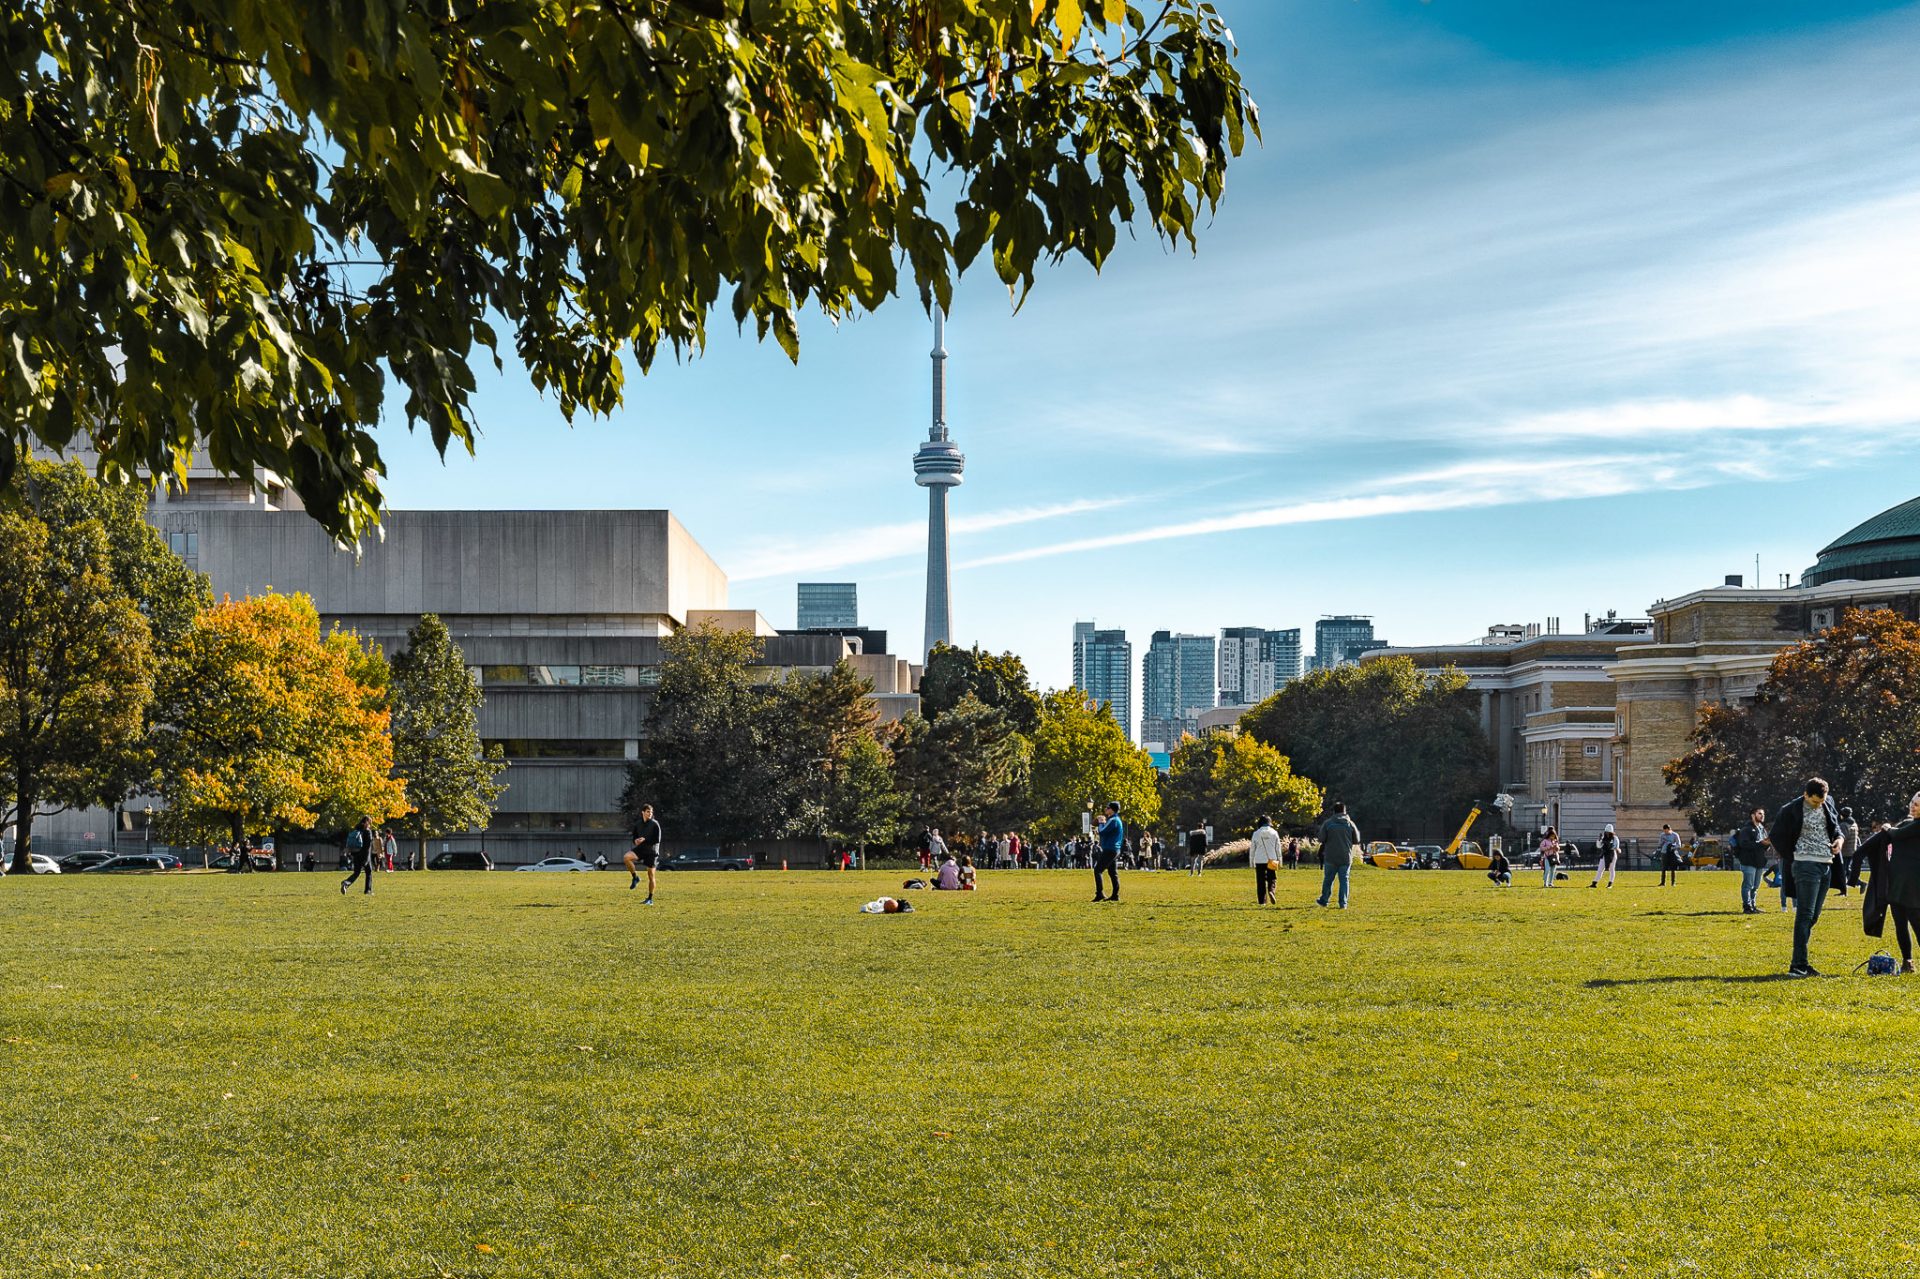 The CN Tower seen on a sunny day from the University of Toronto campus